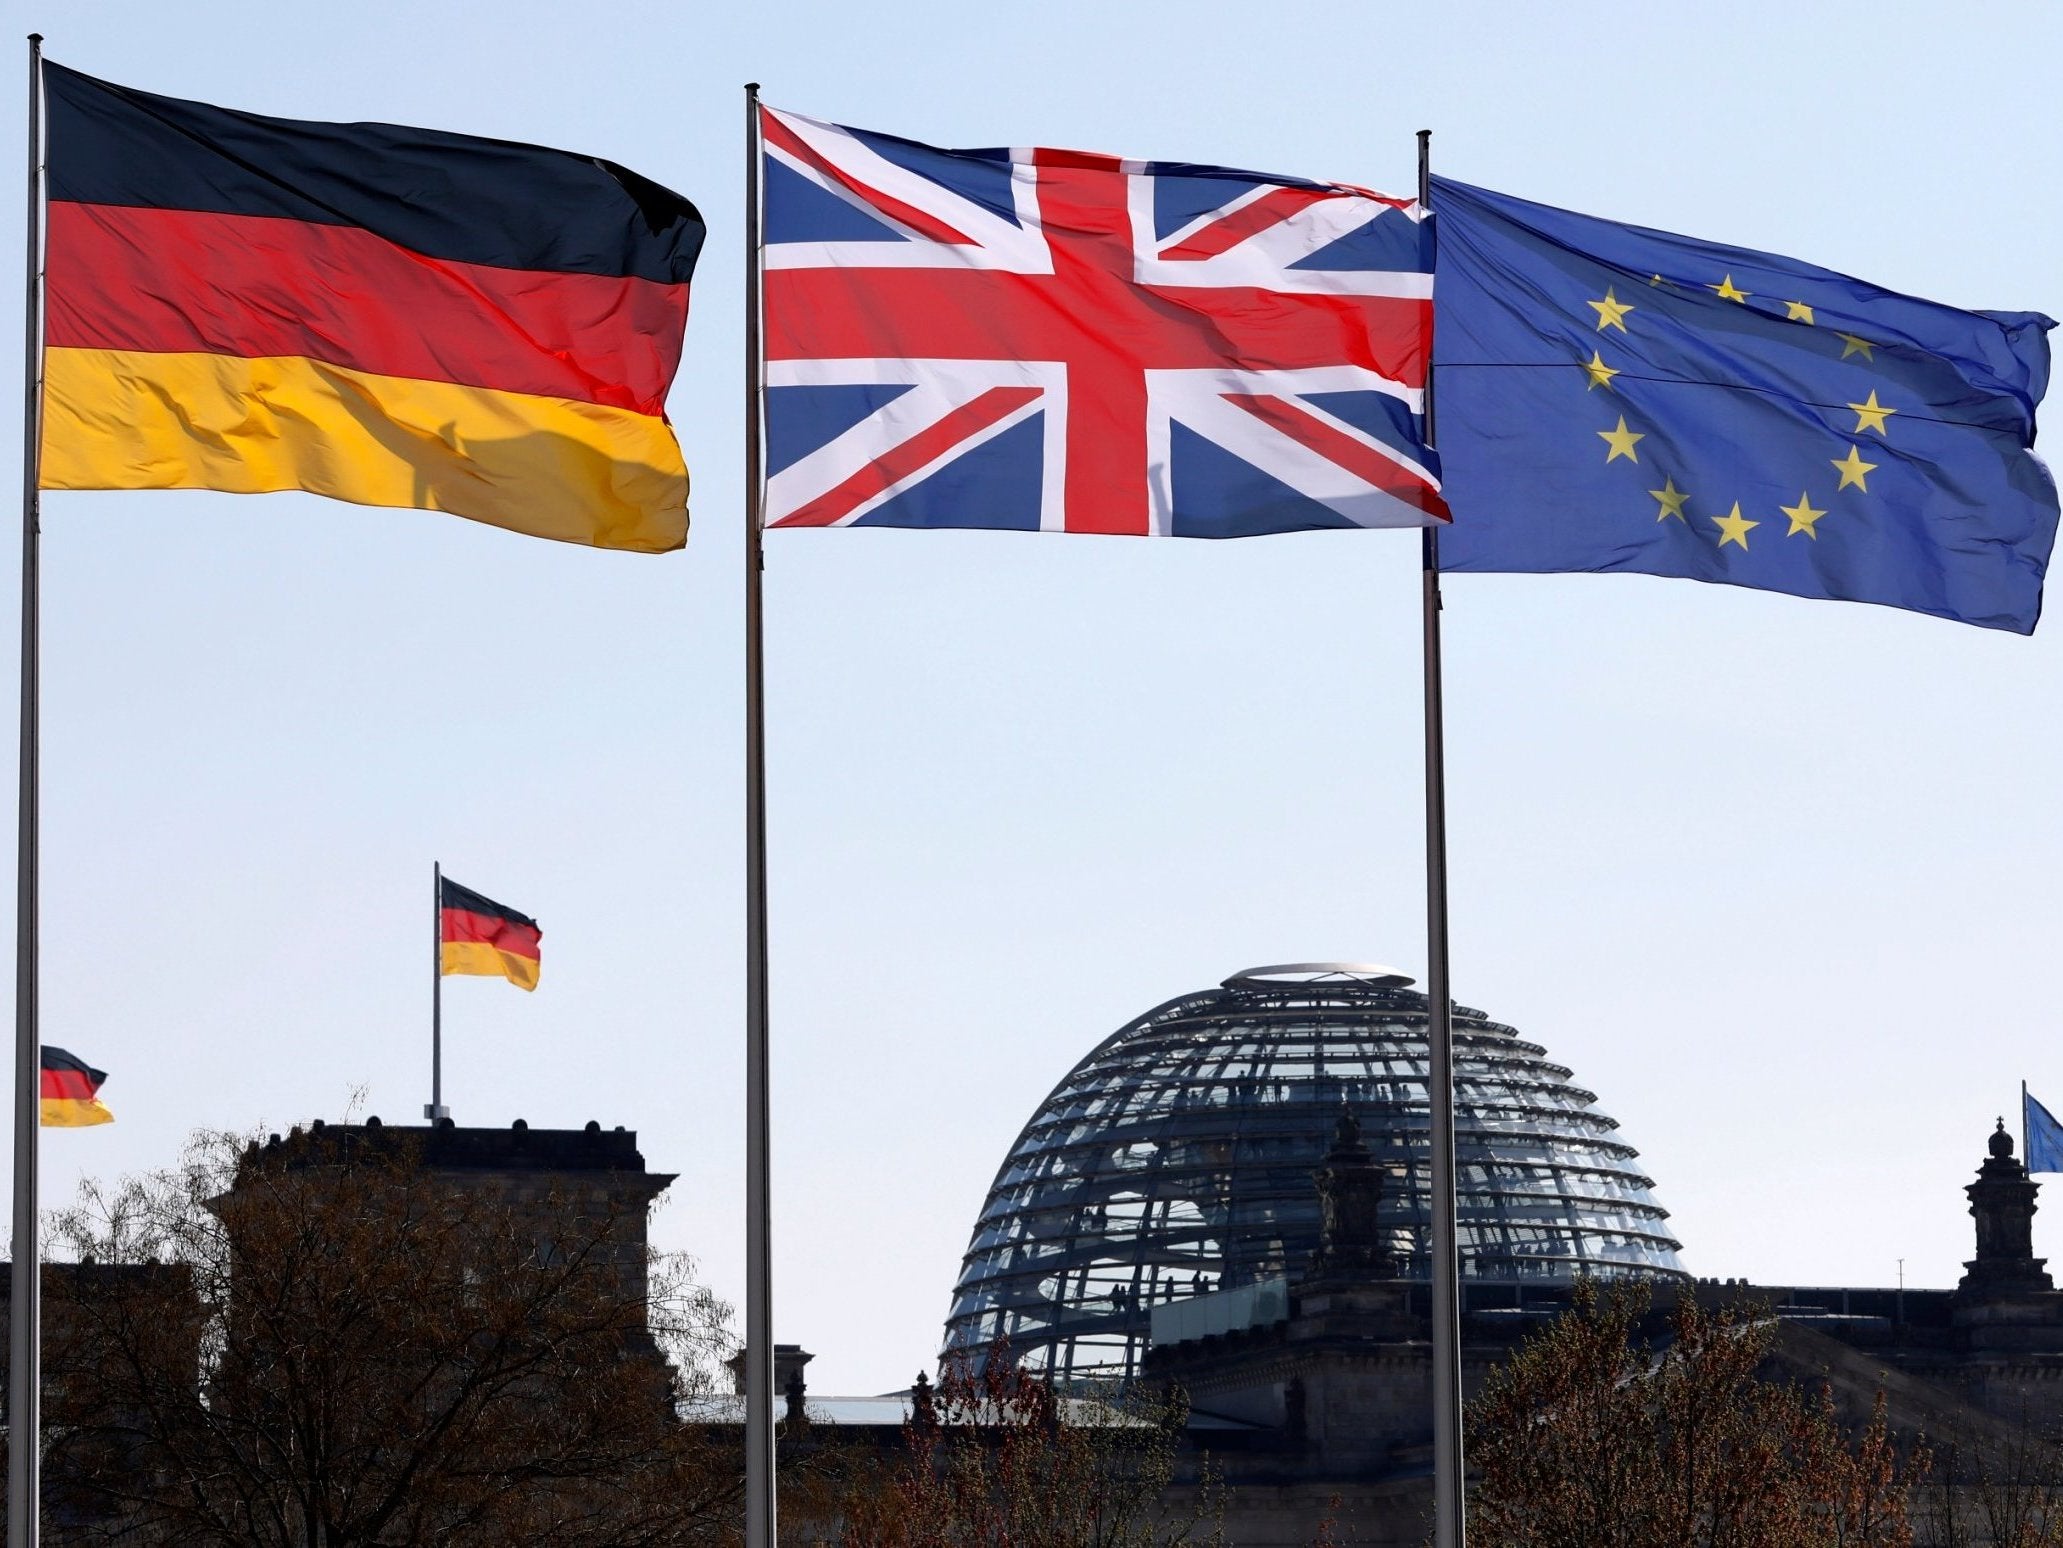 Before the 2016 referendum the UK was Germany’s fourth most important trader. By the end of this year, Britain is projected to be in the 11th spot.